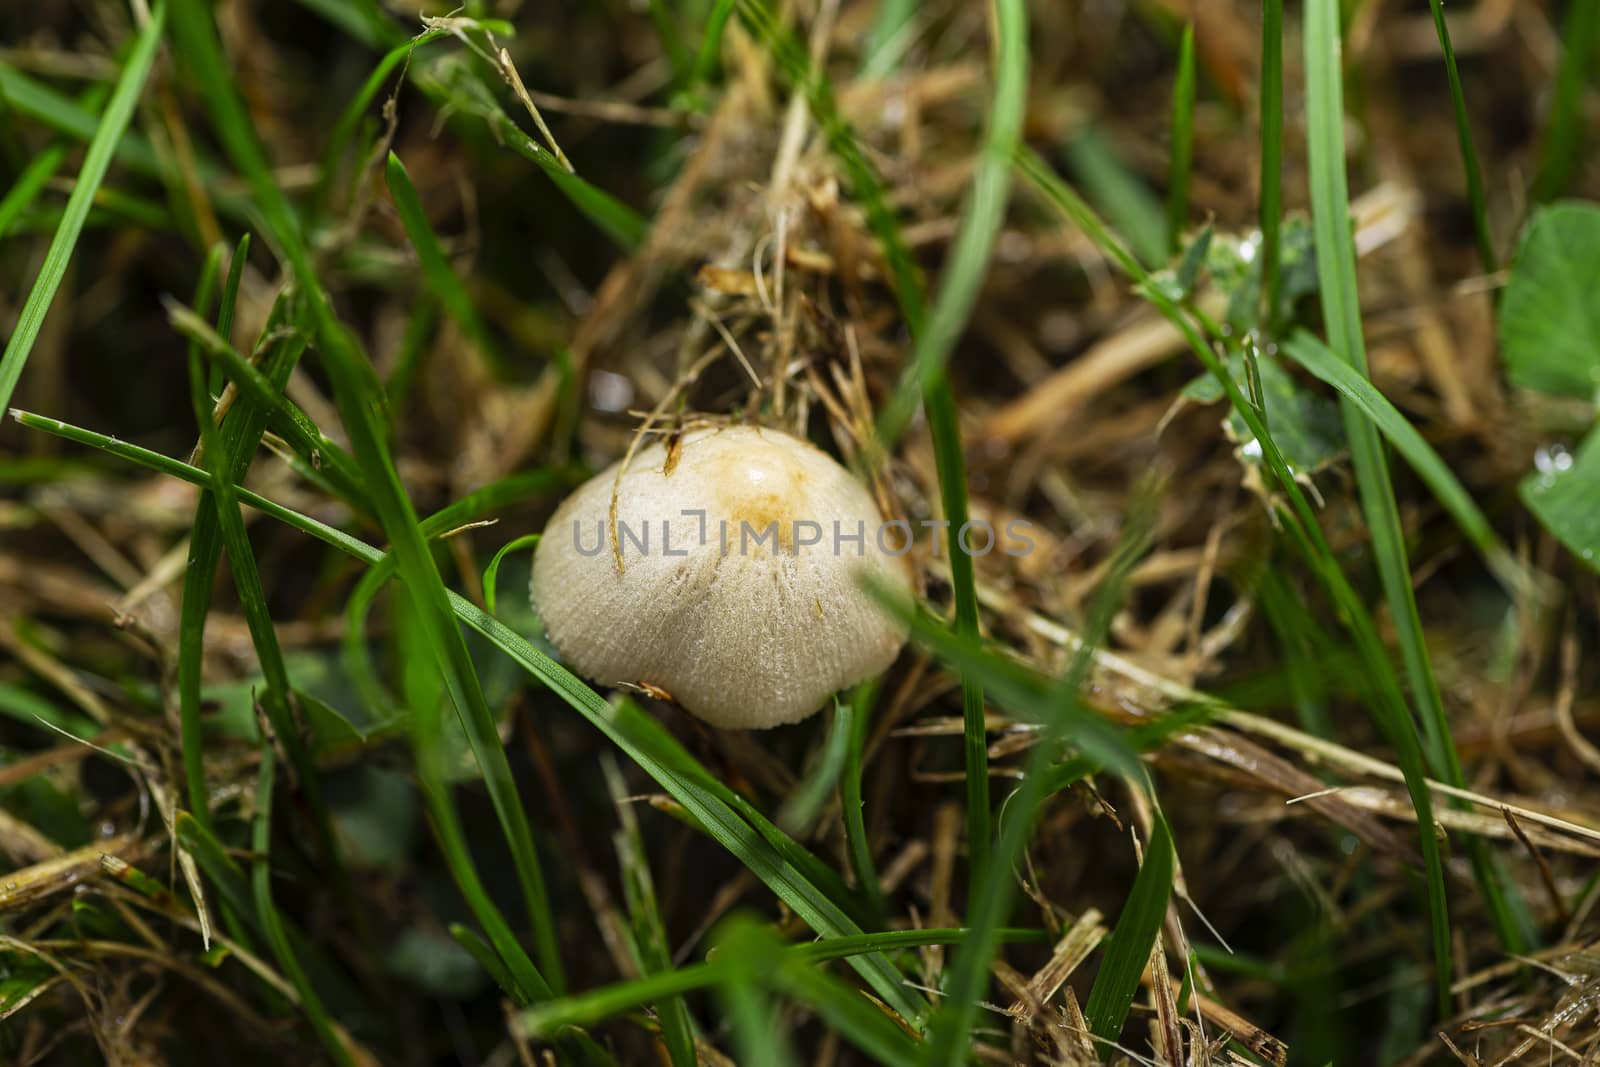 Close-up of a wild mushroom growing in the grass